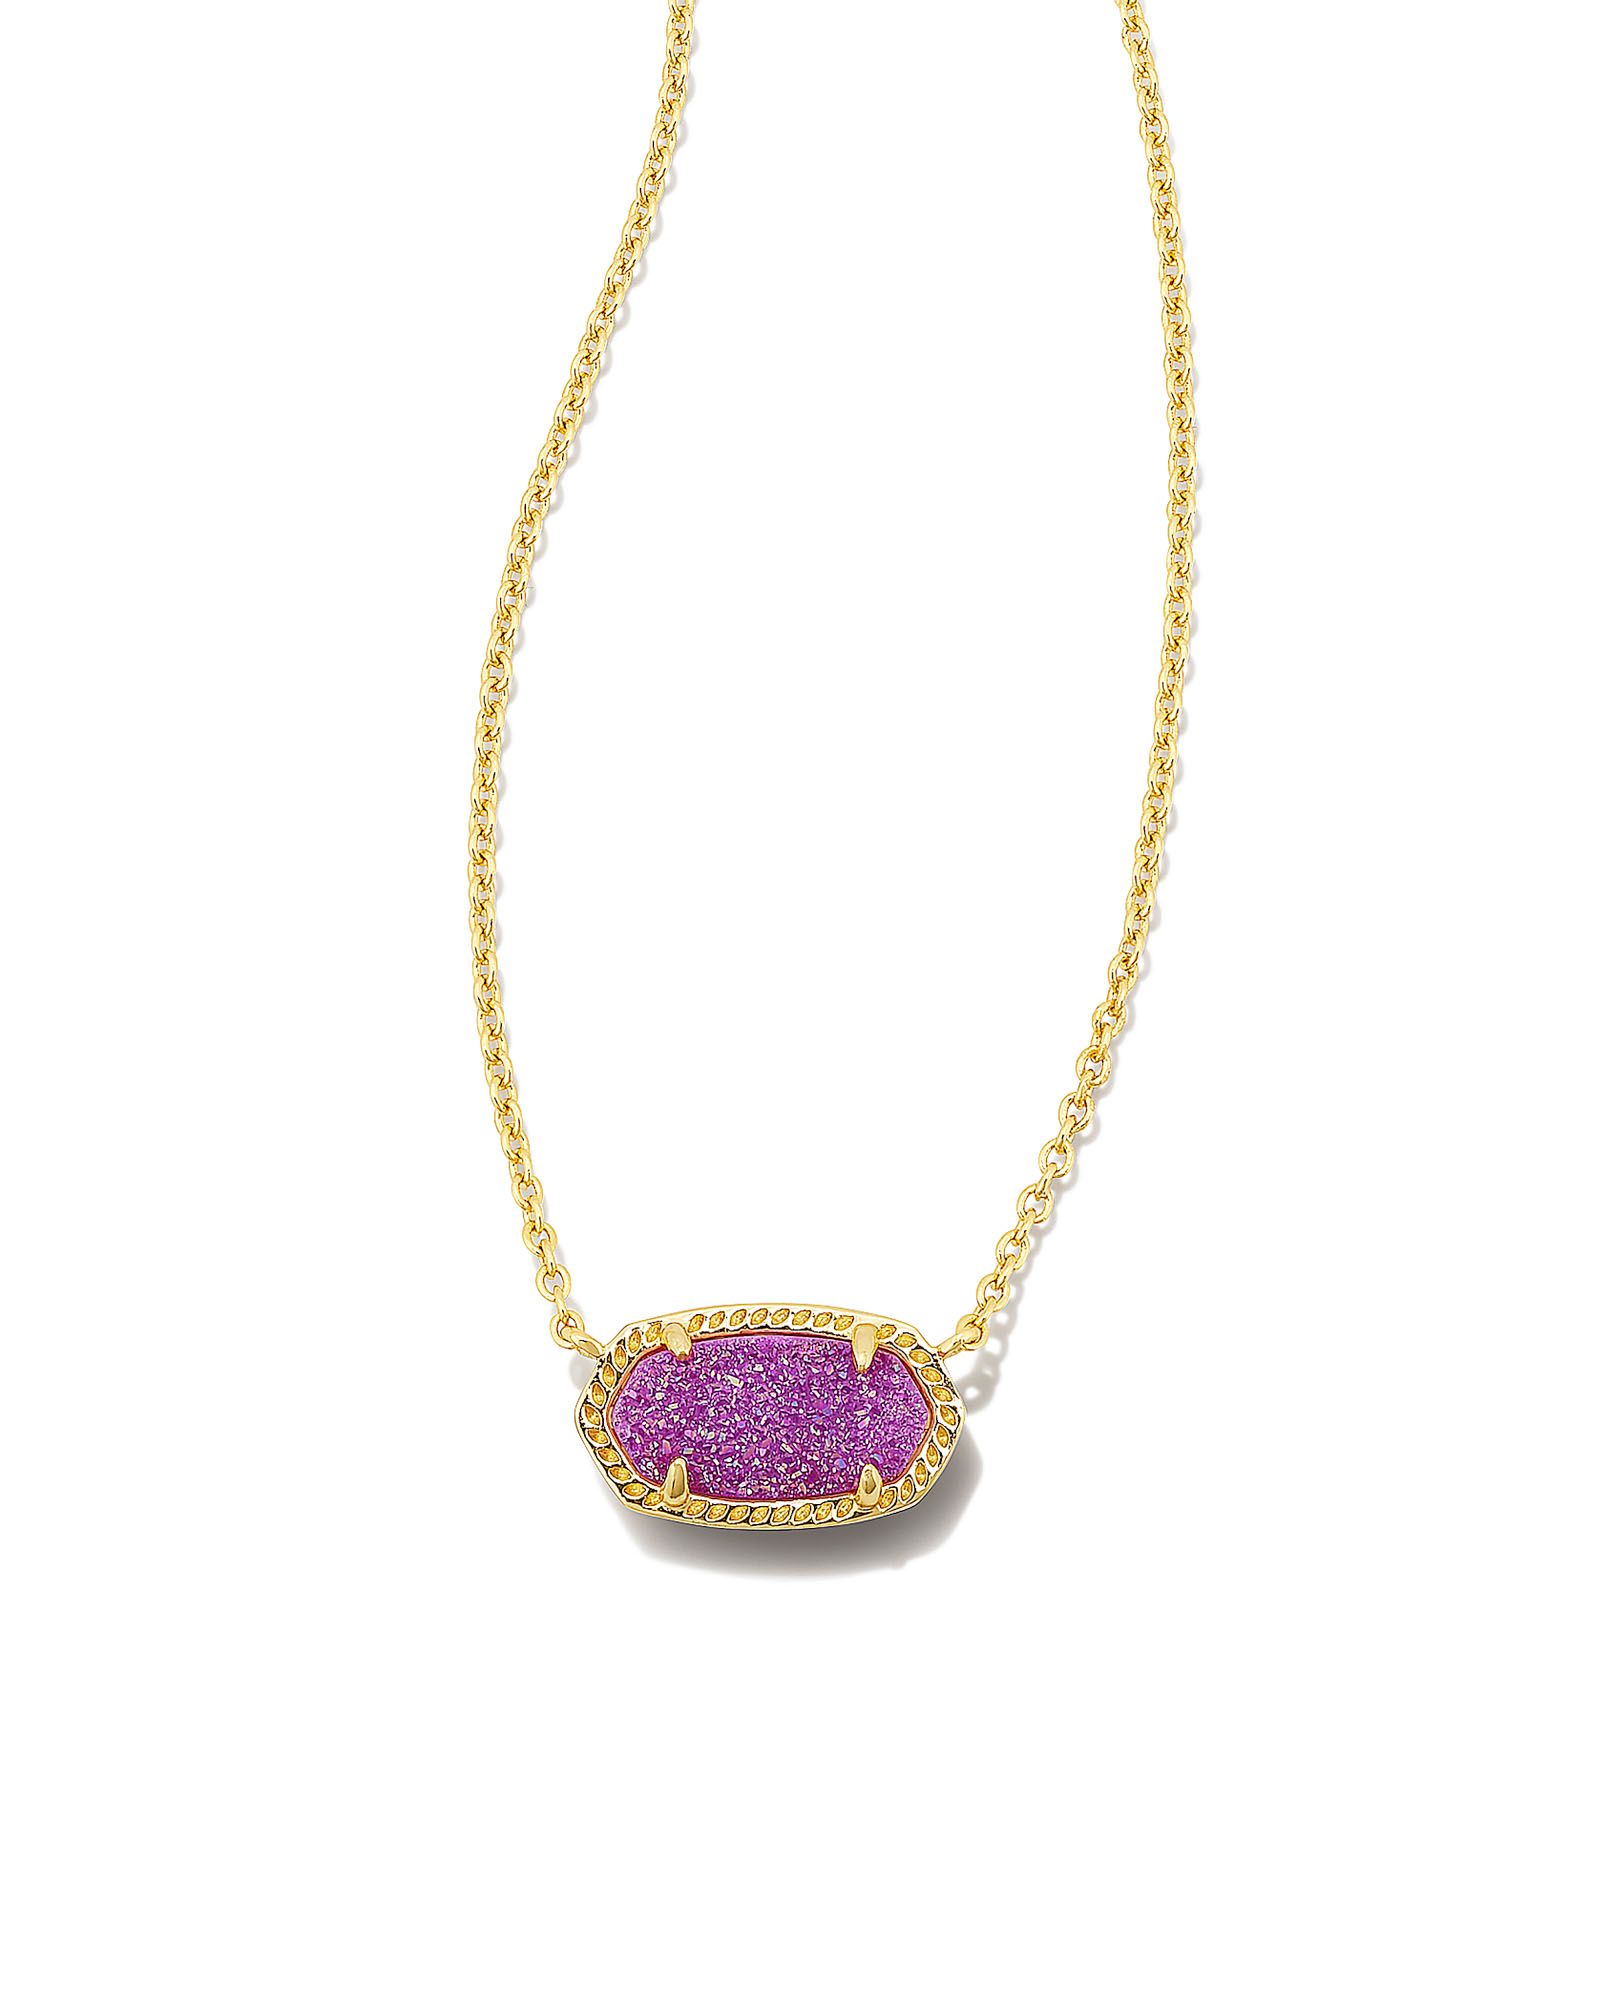 Elisa Gold Pendant Necklace in Mulberry Drusy | Kendra Scott